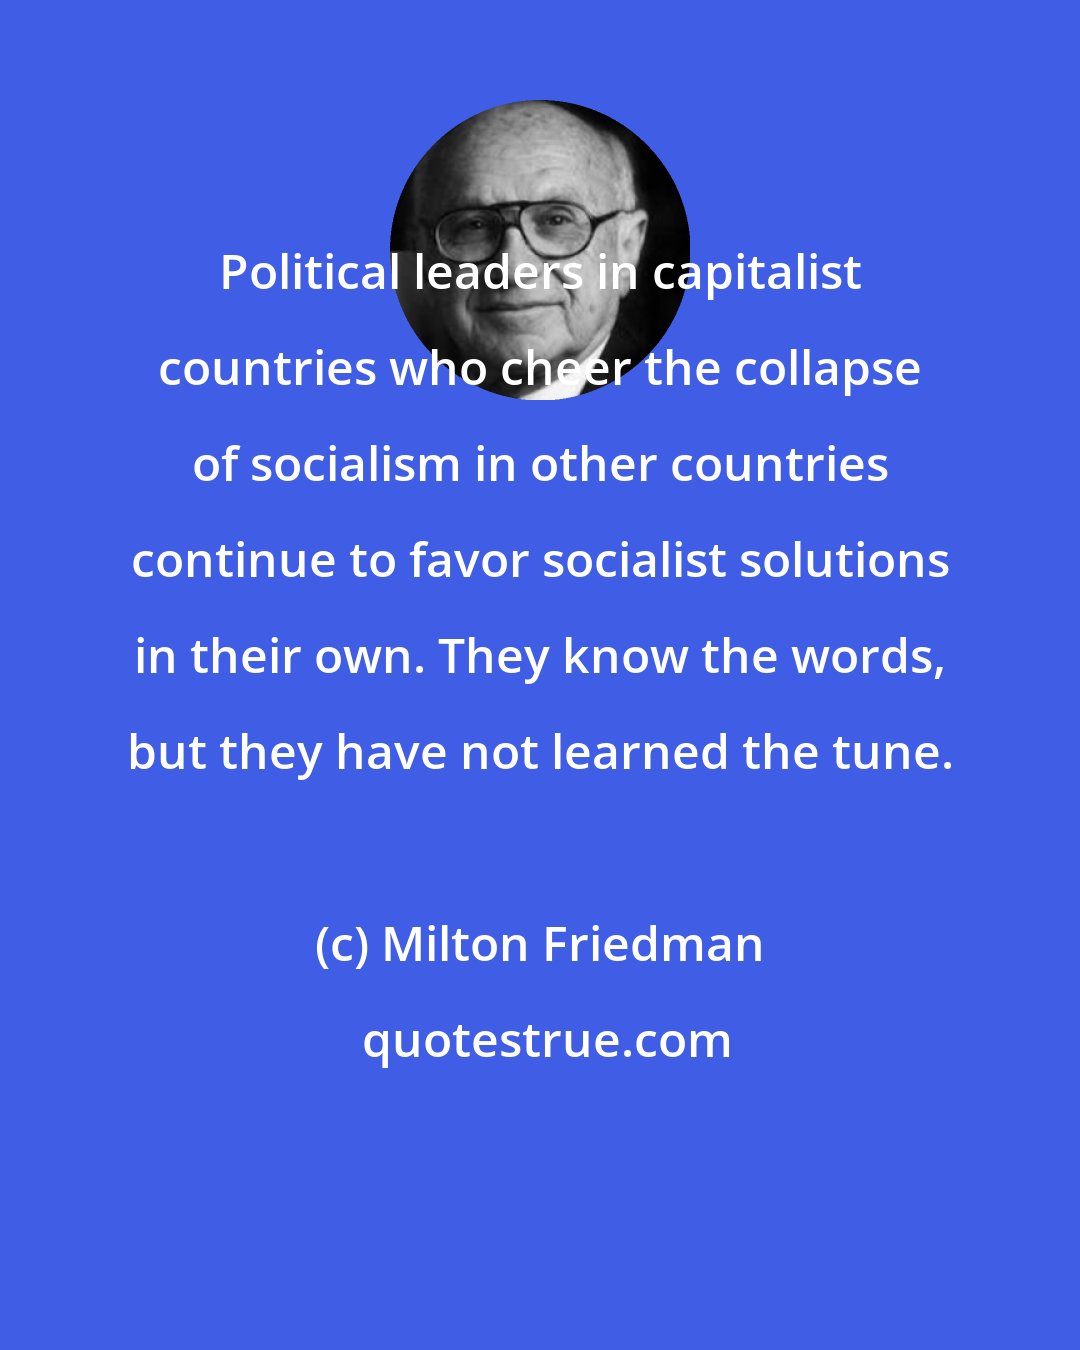 Milton Friedman: Political leaders in capitalist countries who cheer the collapse of socialism in other countries continue to favor socialist solutions in their own. They know the words, but they have not learned the tune.